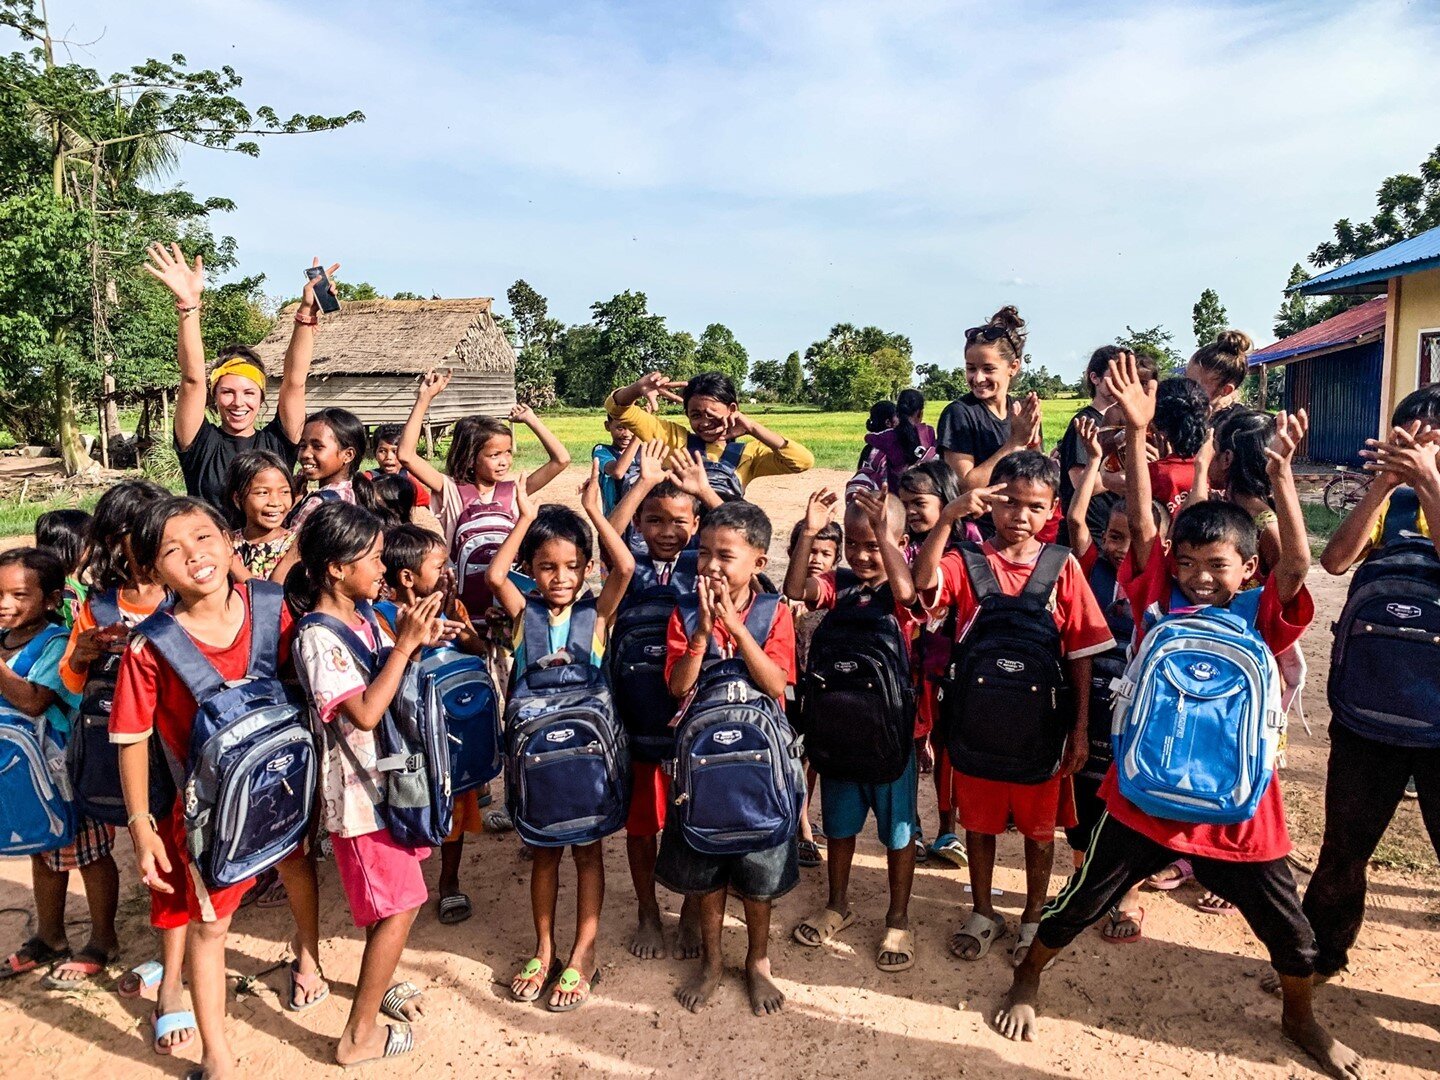 Cheers and a huge thank you to our incredible donors who have helped us provide our students with the school supplies they need and deserve. Without your support, The Hearts Company wouldn't have been able to impact and change the lives of hundreds a